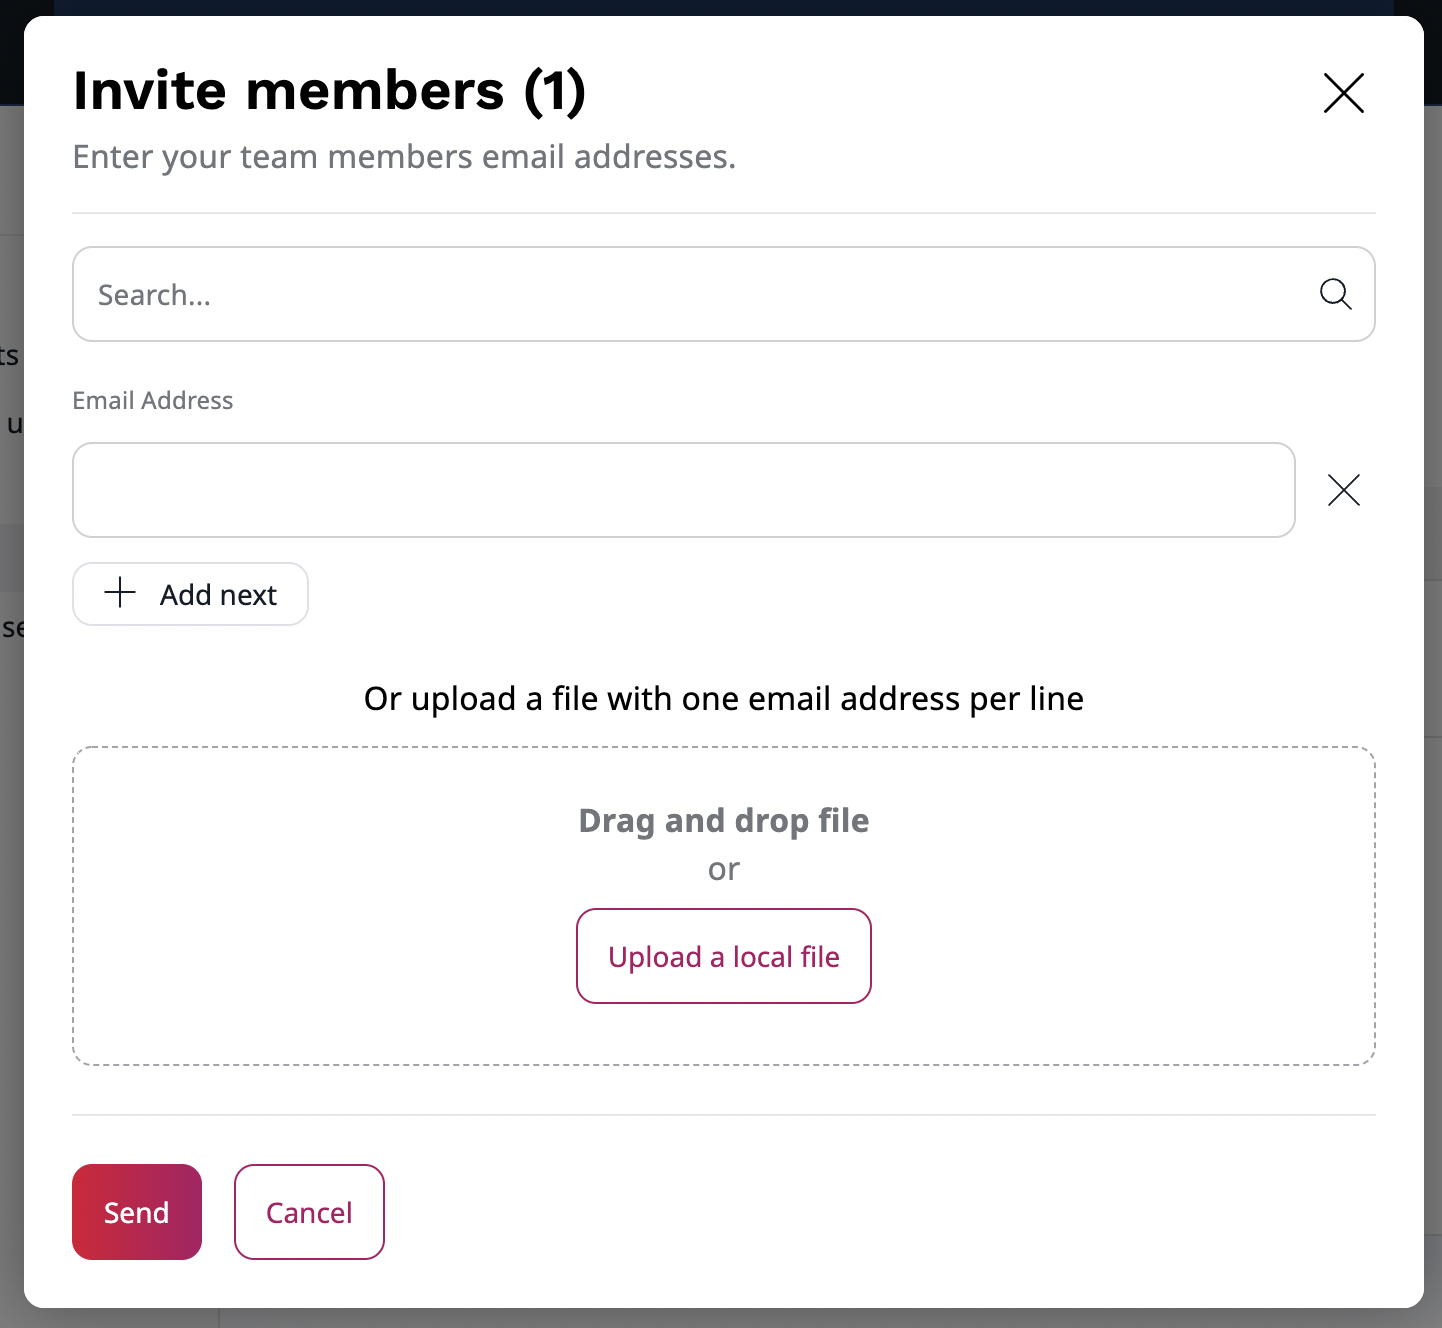 Inviting members of your team